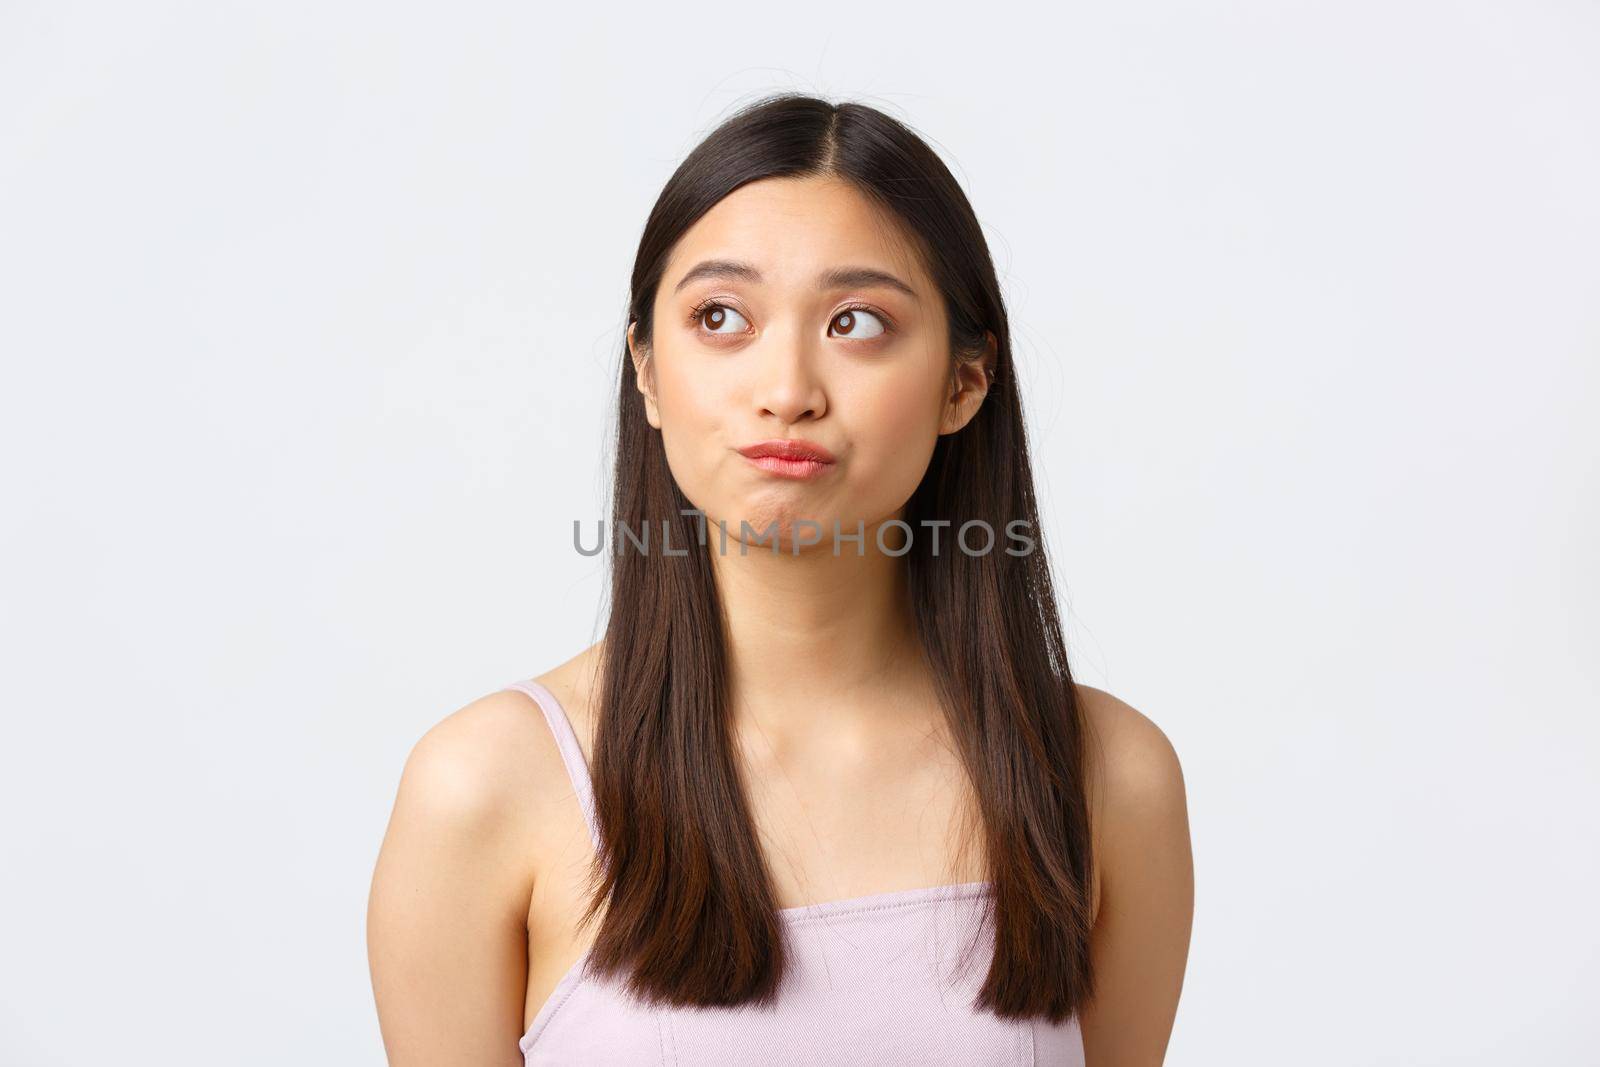 Concept of beauty, fashion and makeup products advertisement. Close-up portrait of beautiful indecisive asian girl having doubts, looking left and smirk unsure, hesitating over white background.